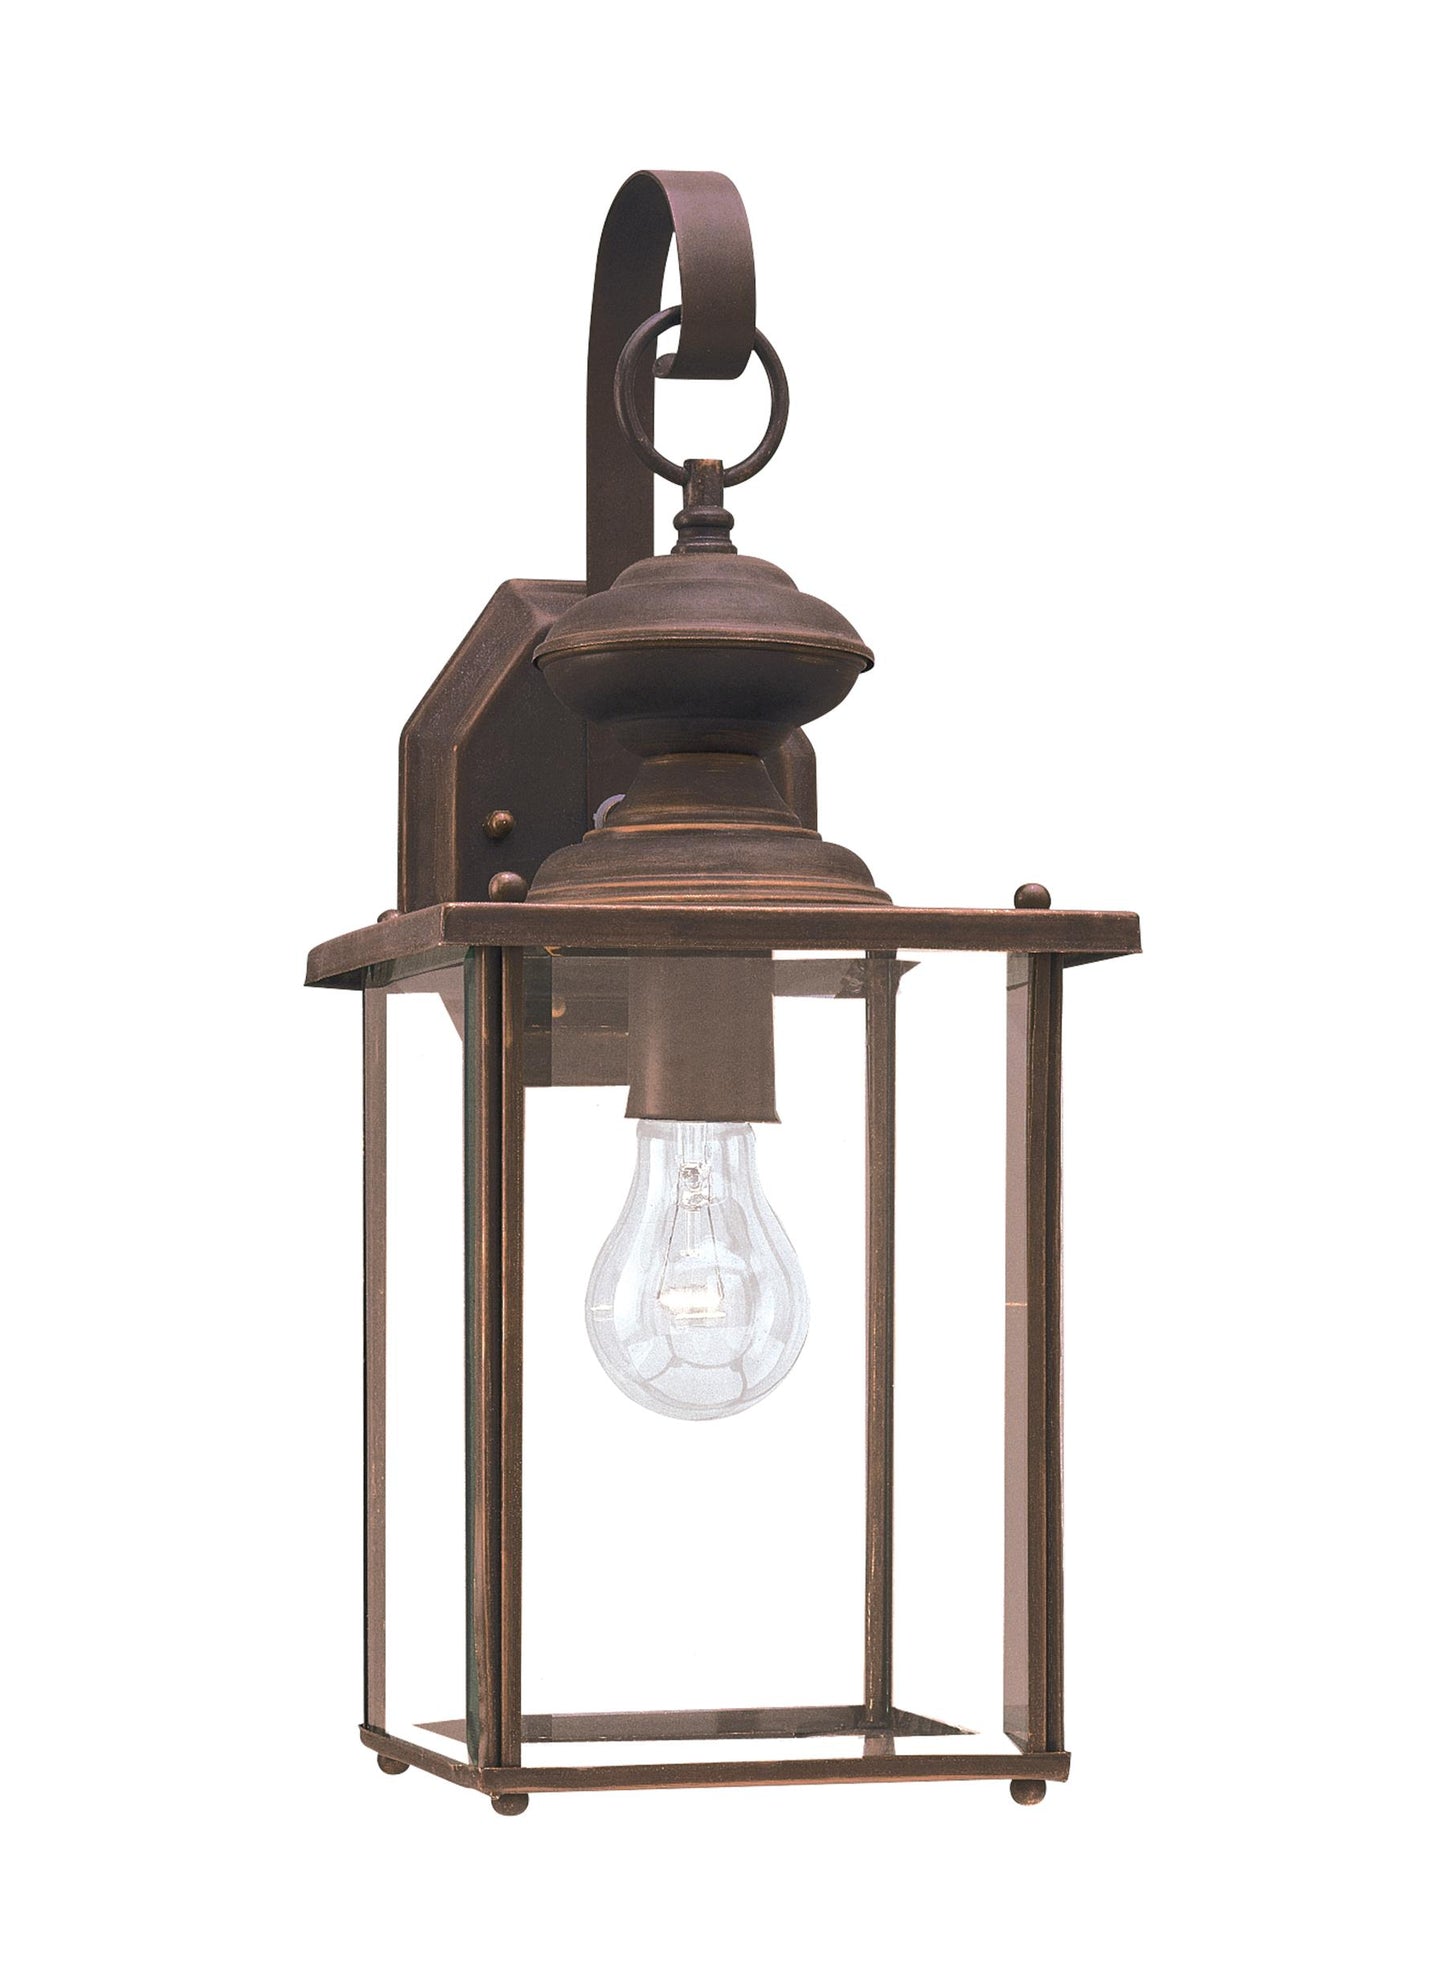 Jamestowne transitional 1-light large outdoor exterior Dark Sky compliant wall lantern sconce in antique bronze finish wit...